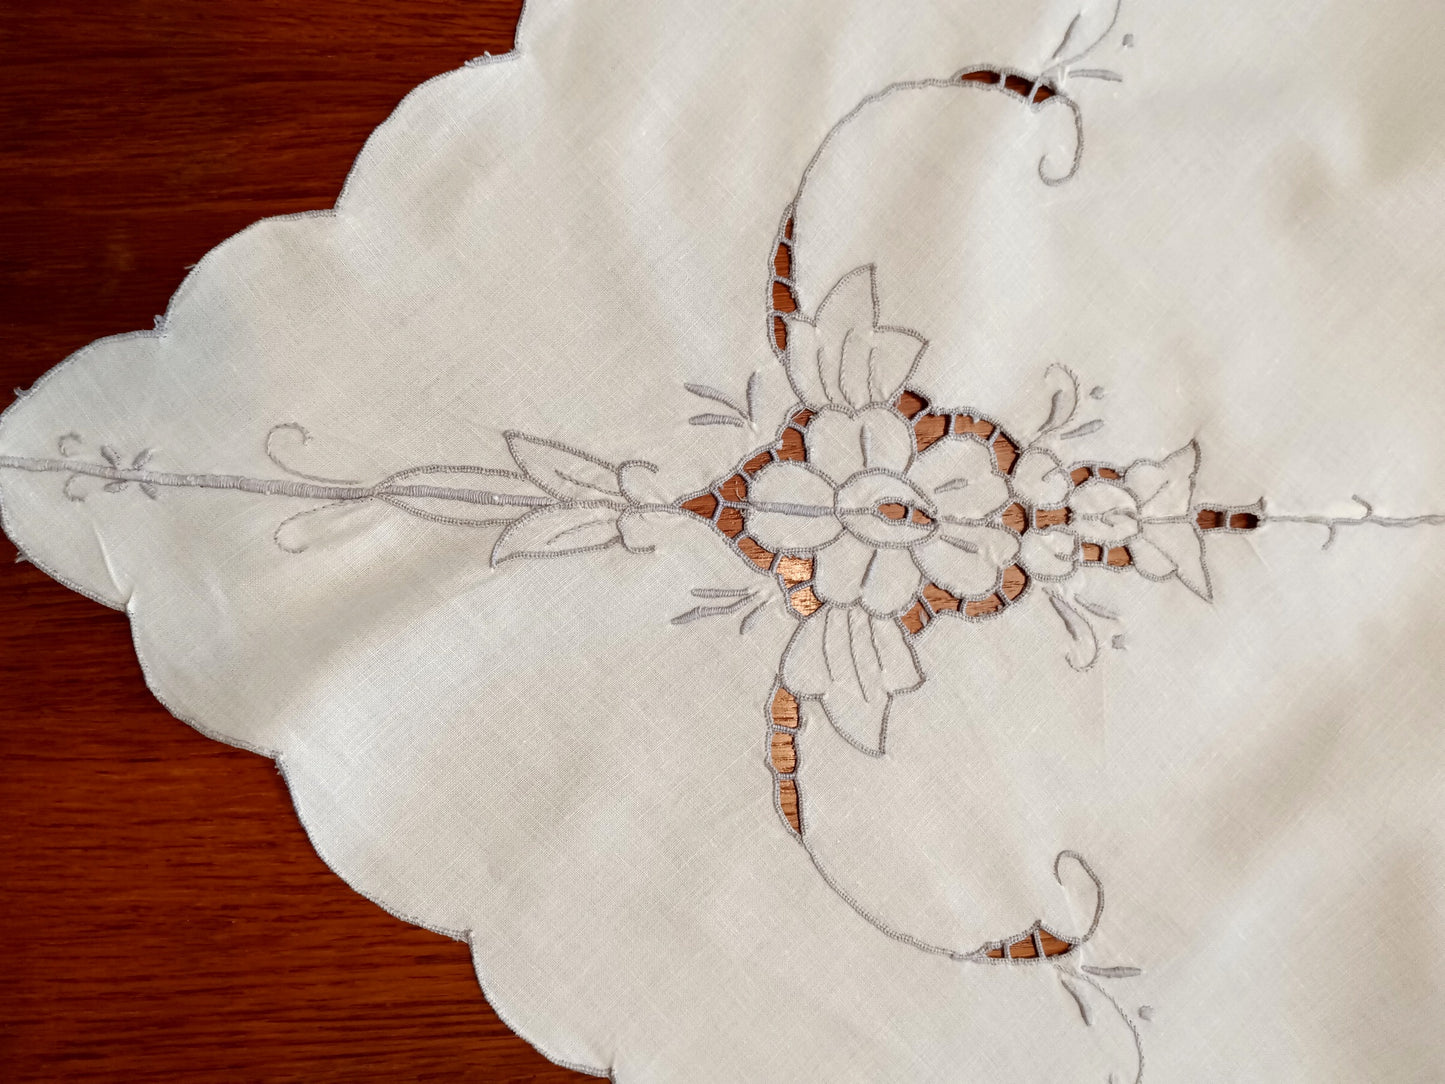 Vintage Ivory Cotton Linen Small Tablecloth Embroidered Floral Cut Work Design Machine Stitching Ecru Color Thread Large Doily 41” W x 41” L